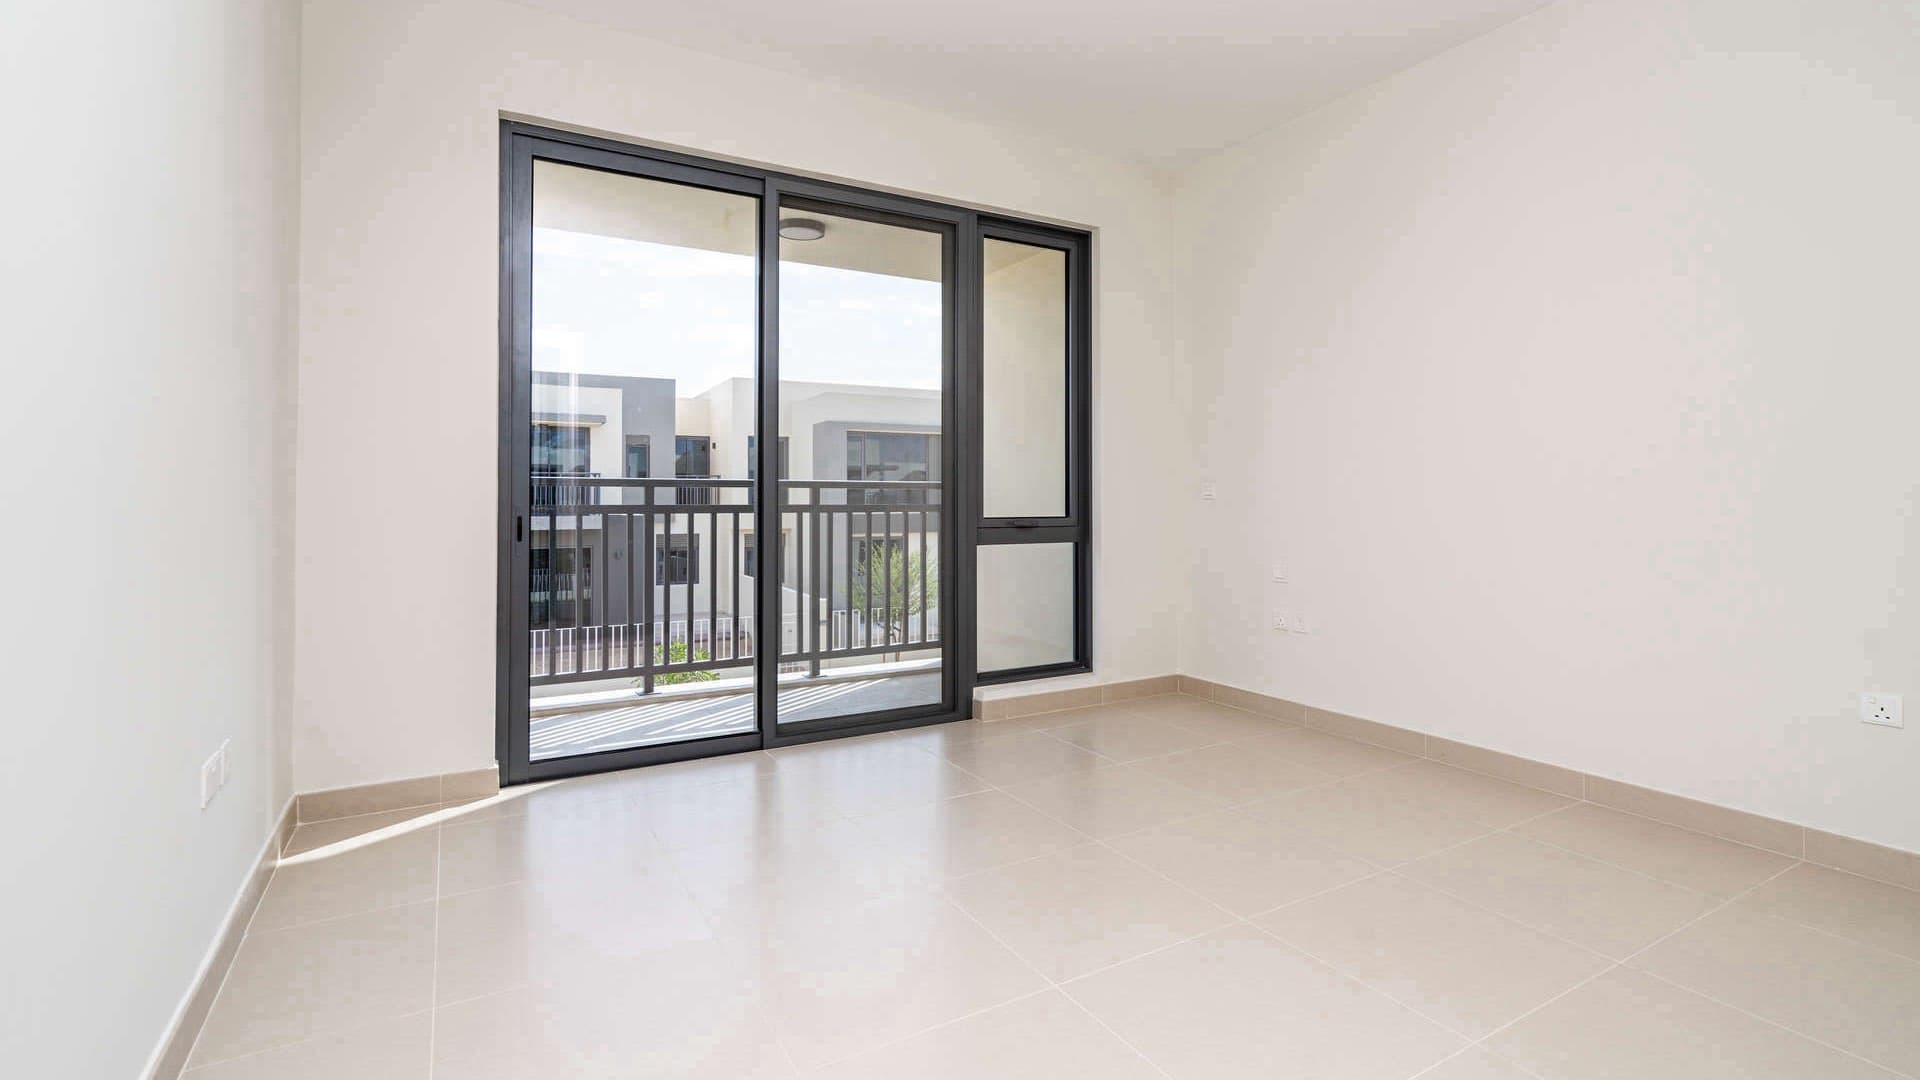 3 Bedroom Townhouse For Sale Maple At Dubai Hills Estate Lp08597 1891a68cd50a7f00.jpg